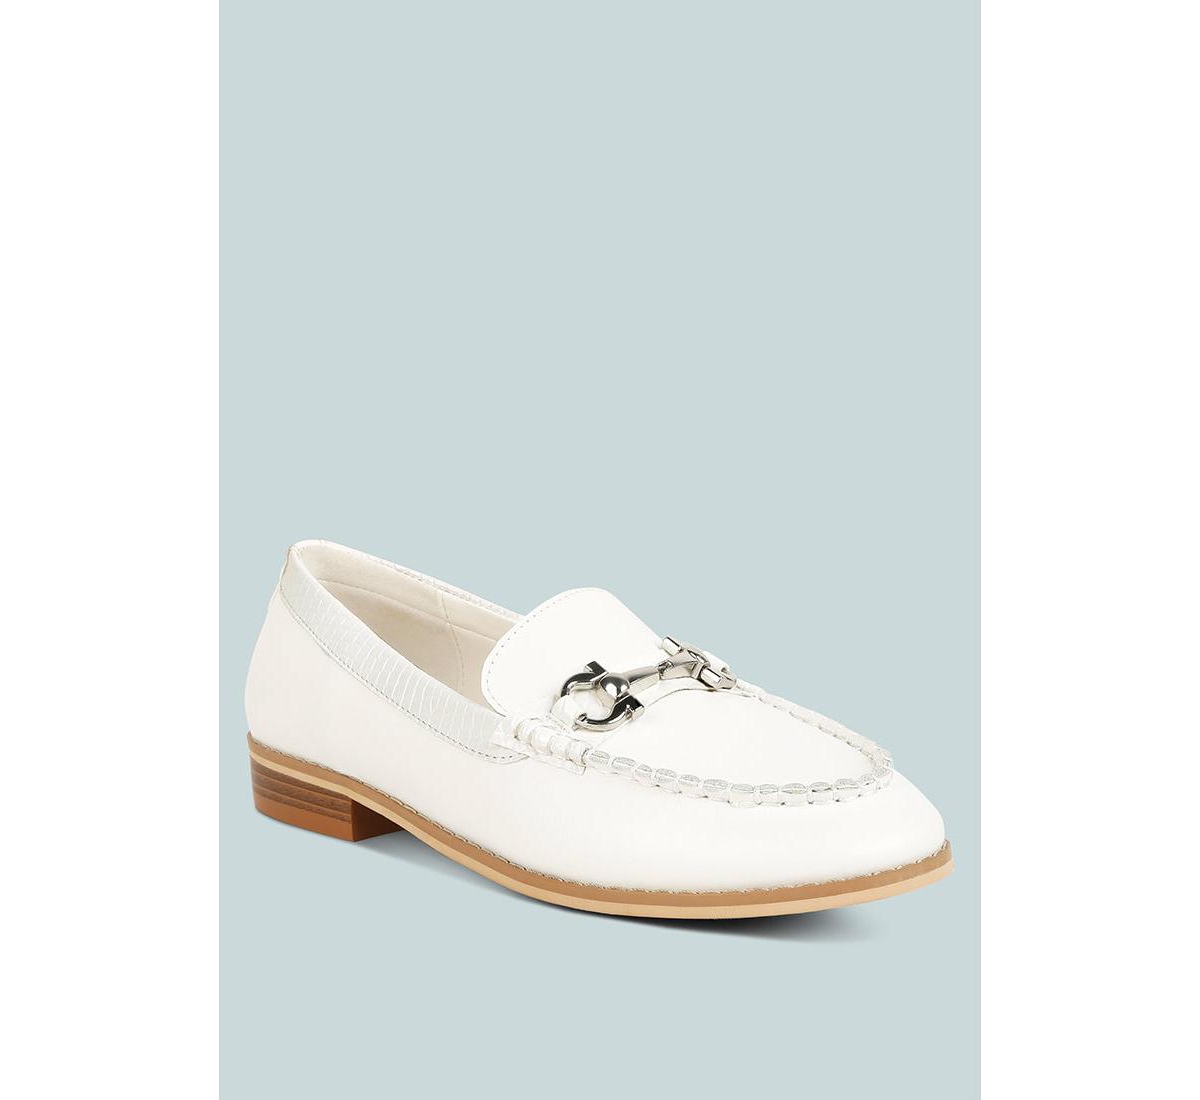 RAG & CO HOLDA WOMEN'S HORSEBIT EMBELLISHED LOAFERS WITH STITCH DETAIL